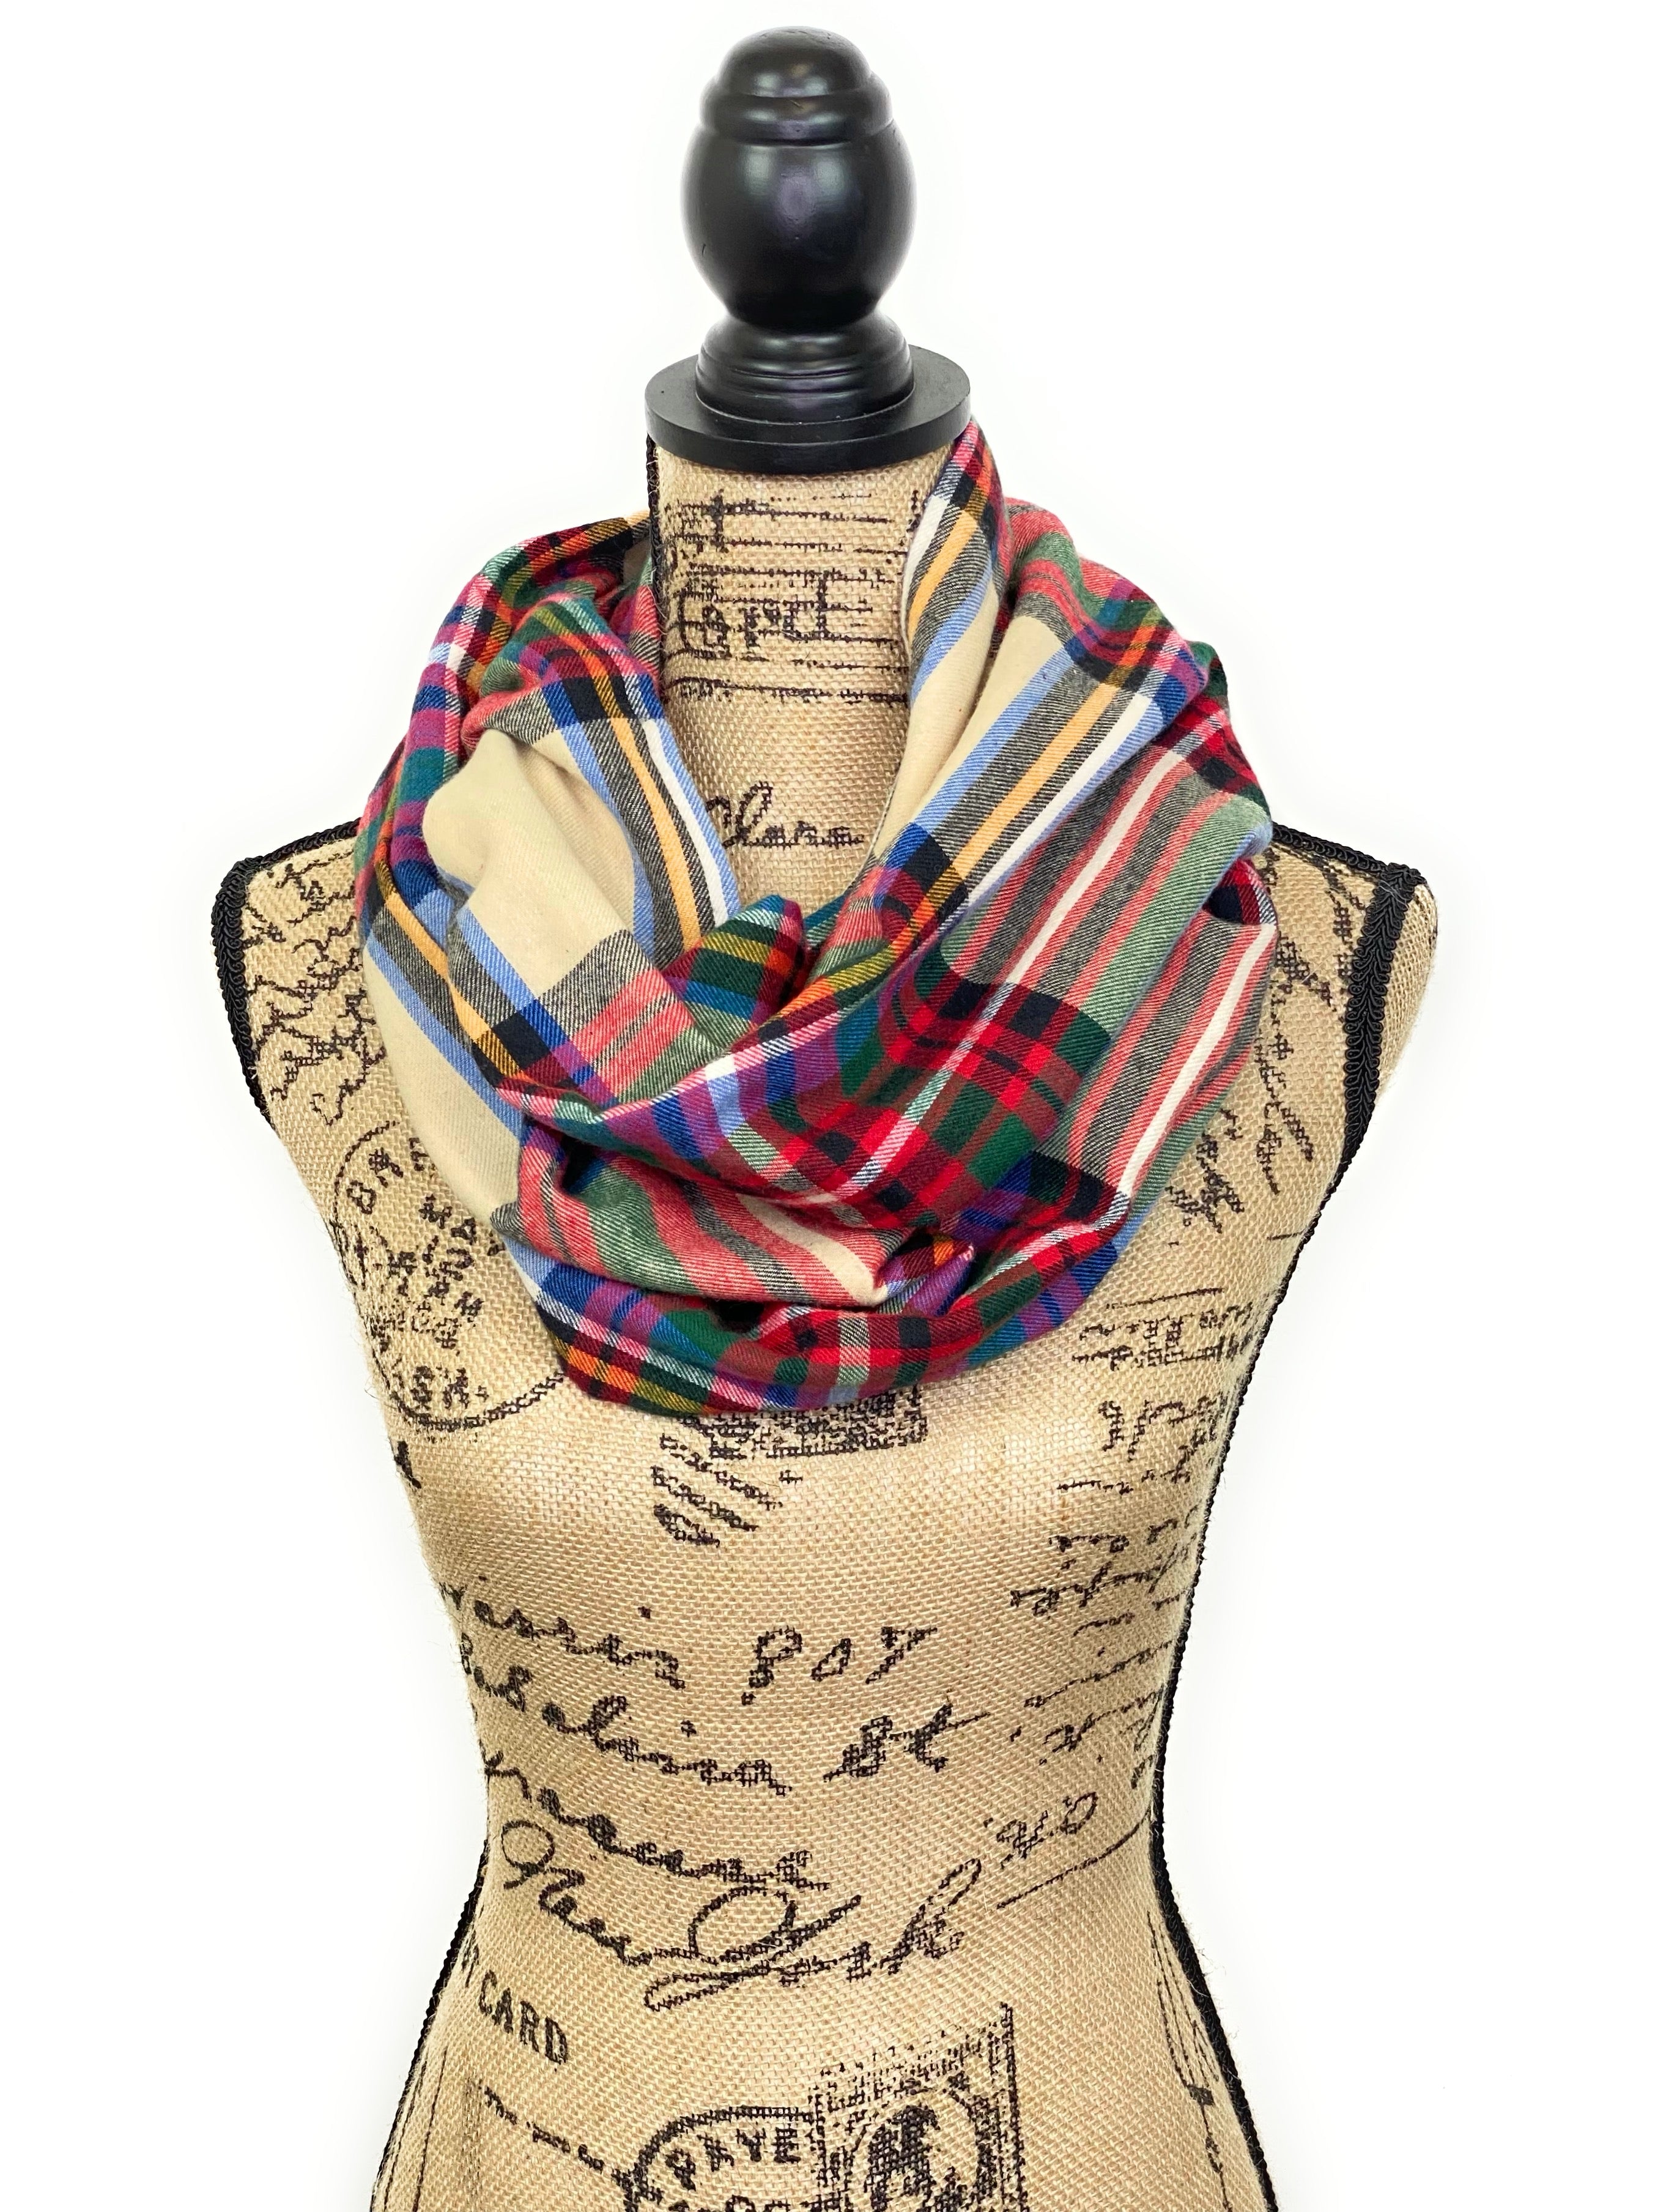 Colorful Madras Plaid in Tan, Black, Blue, Yellow, Green, and Red Lightweight Flannel Infinity or Blanket Scarf